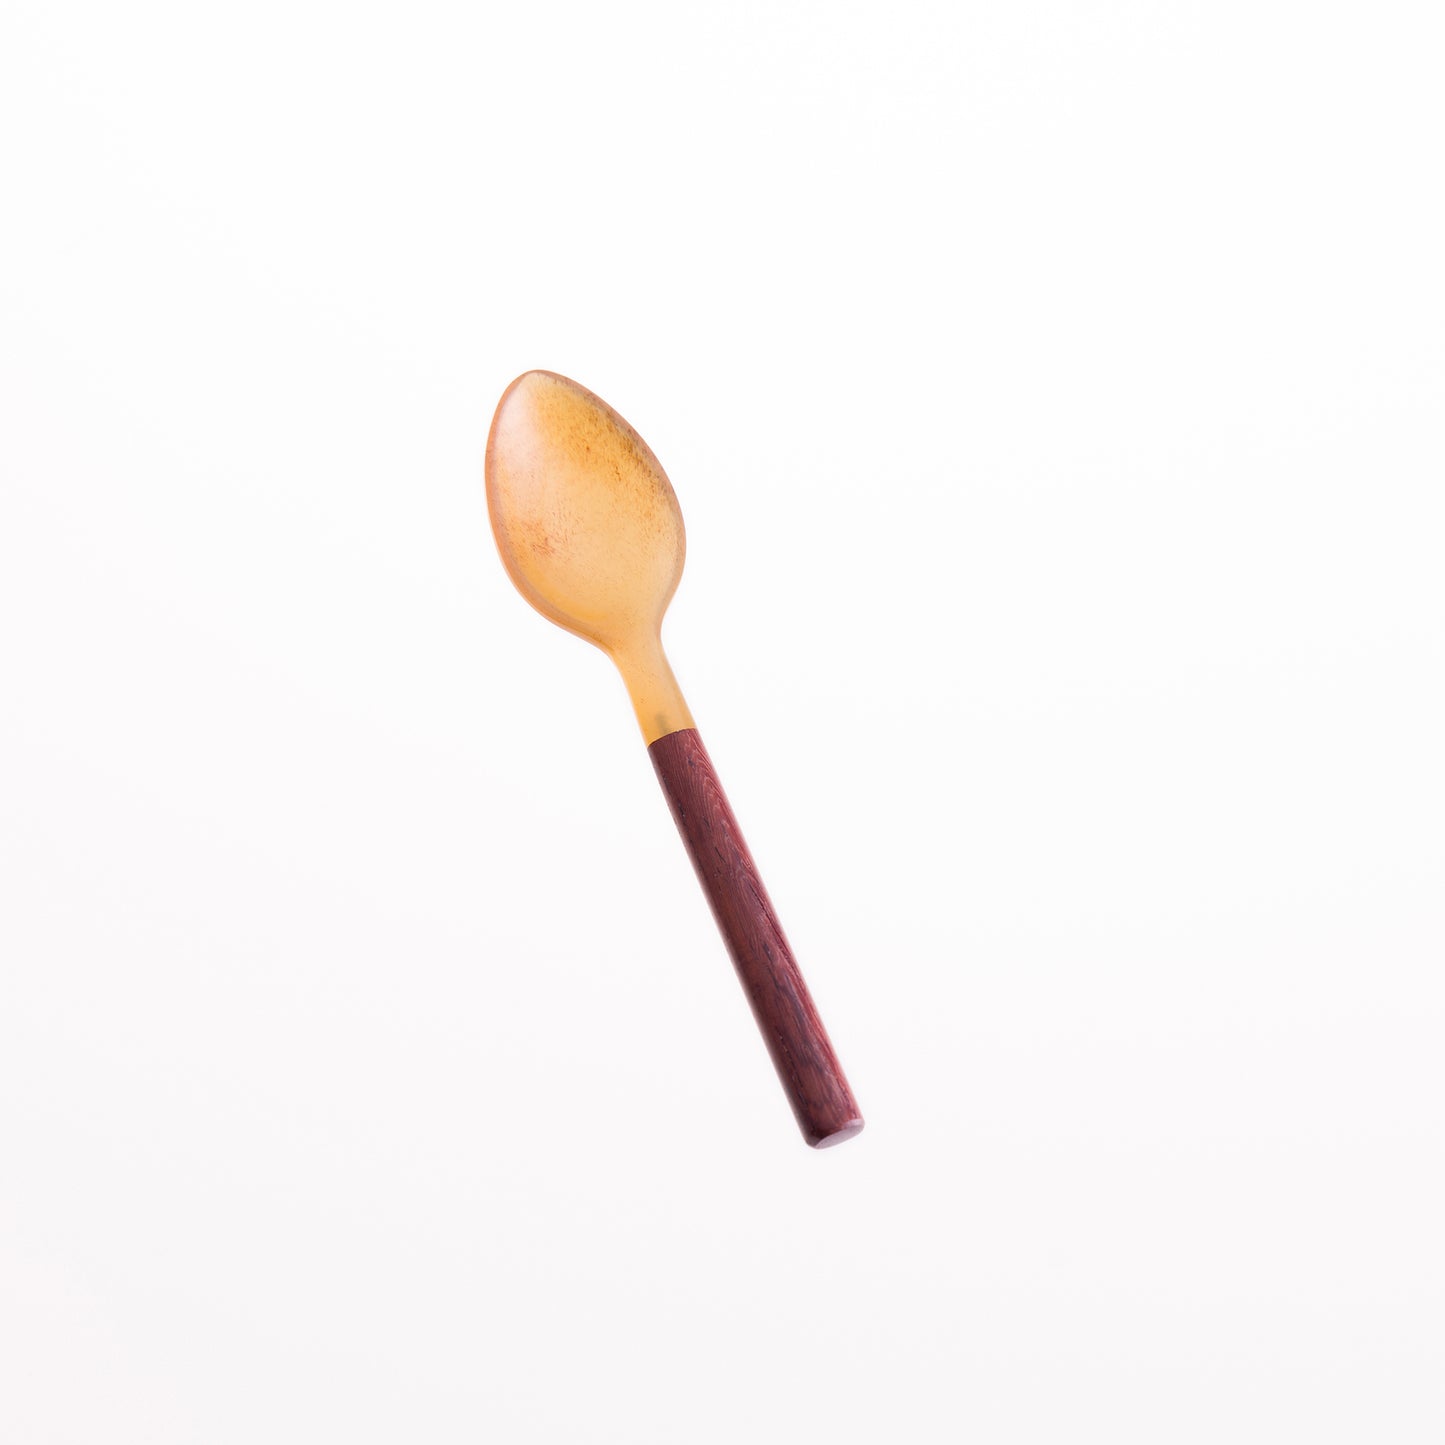 Boxed Egg Spoons - Natural Horn/Rosewood